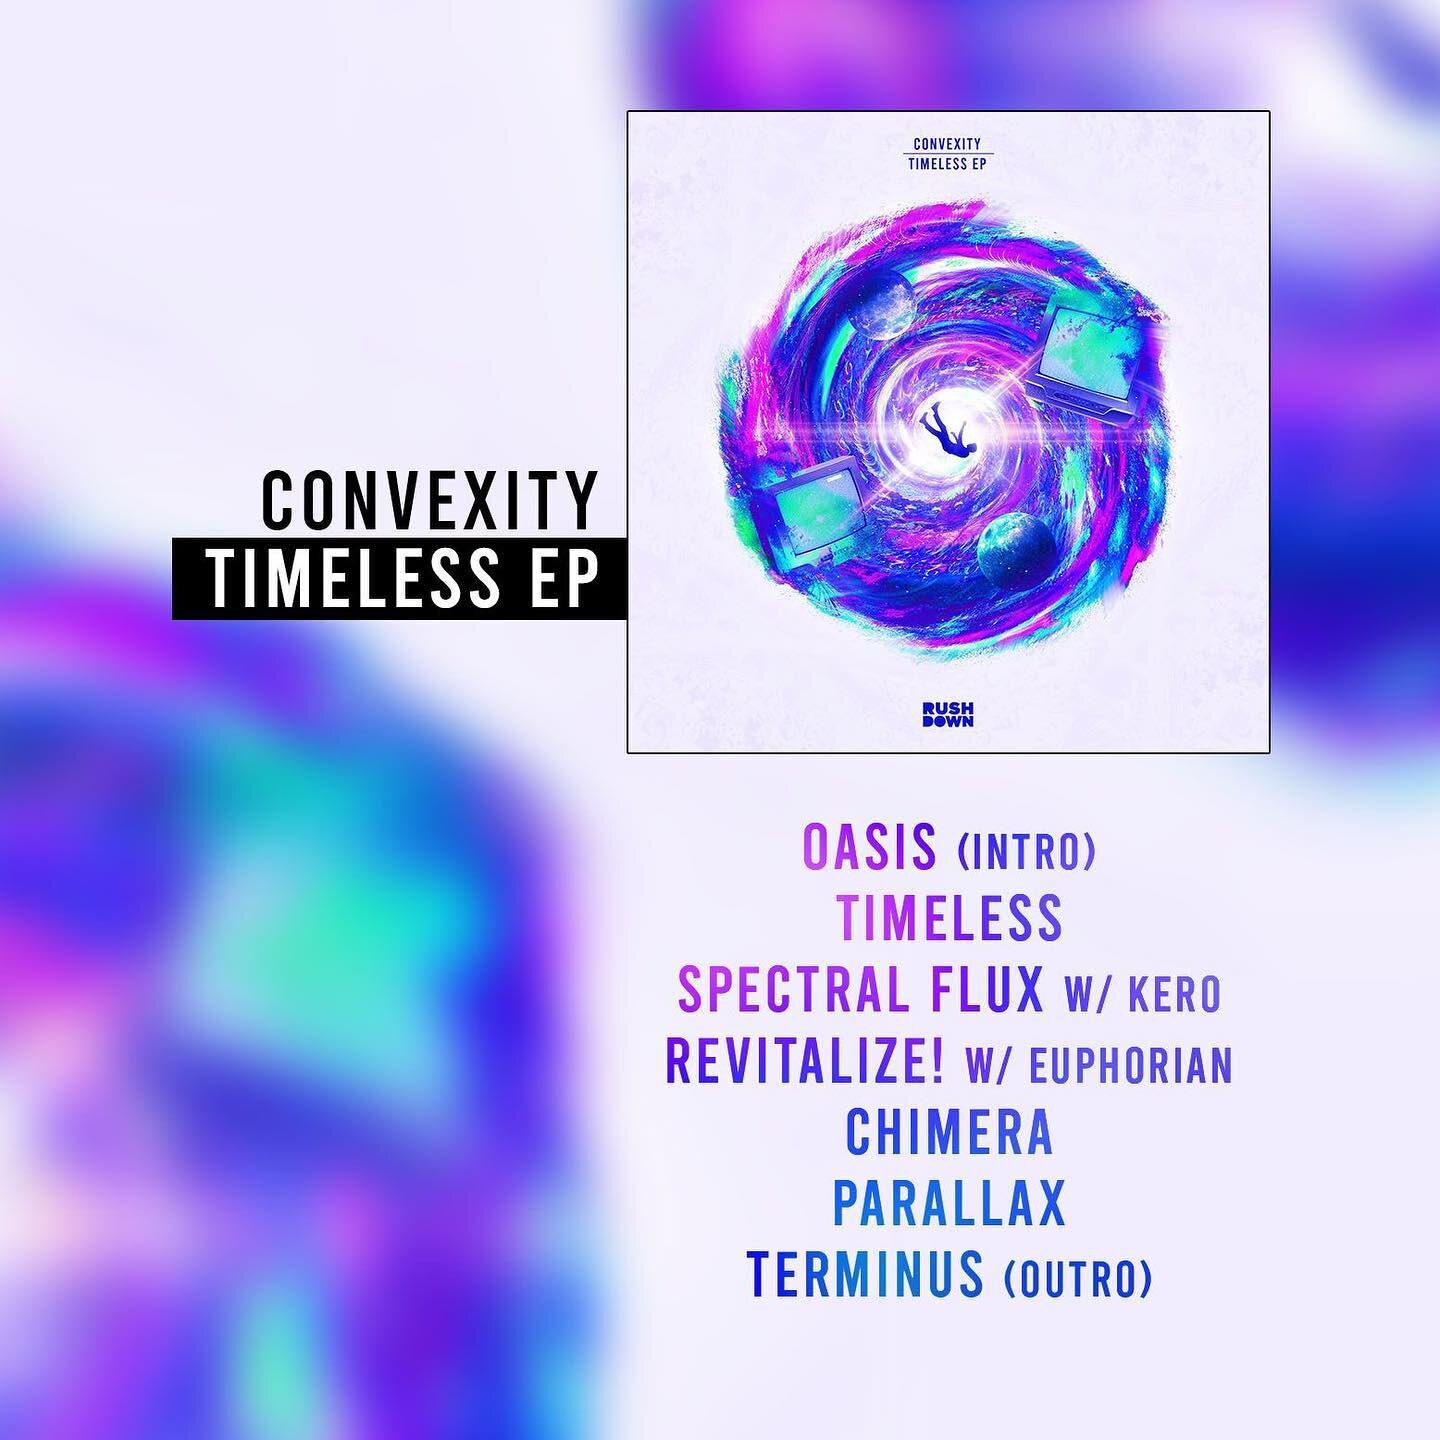 Here&rsquo;s the track list for @convexity_music &lsquo;s Timeless EP!!
Which track are you most excited for?? 
Make sure to pre-save with the link in my bio 📺🪐⏱